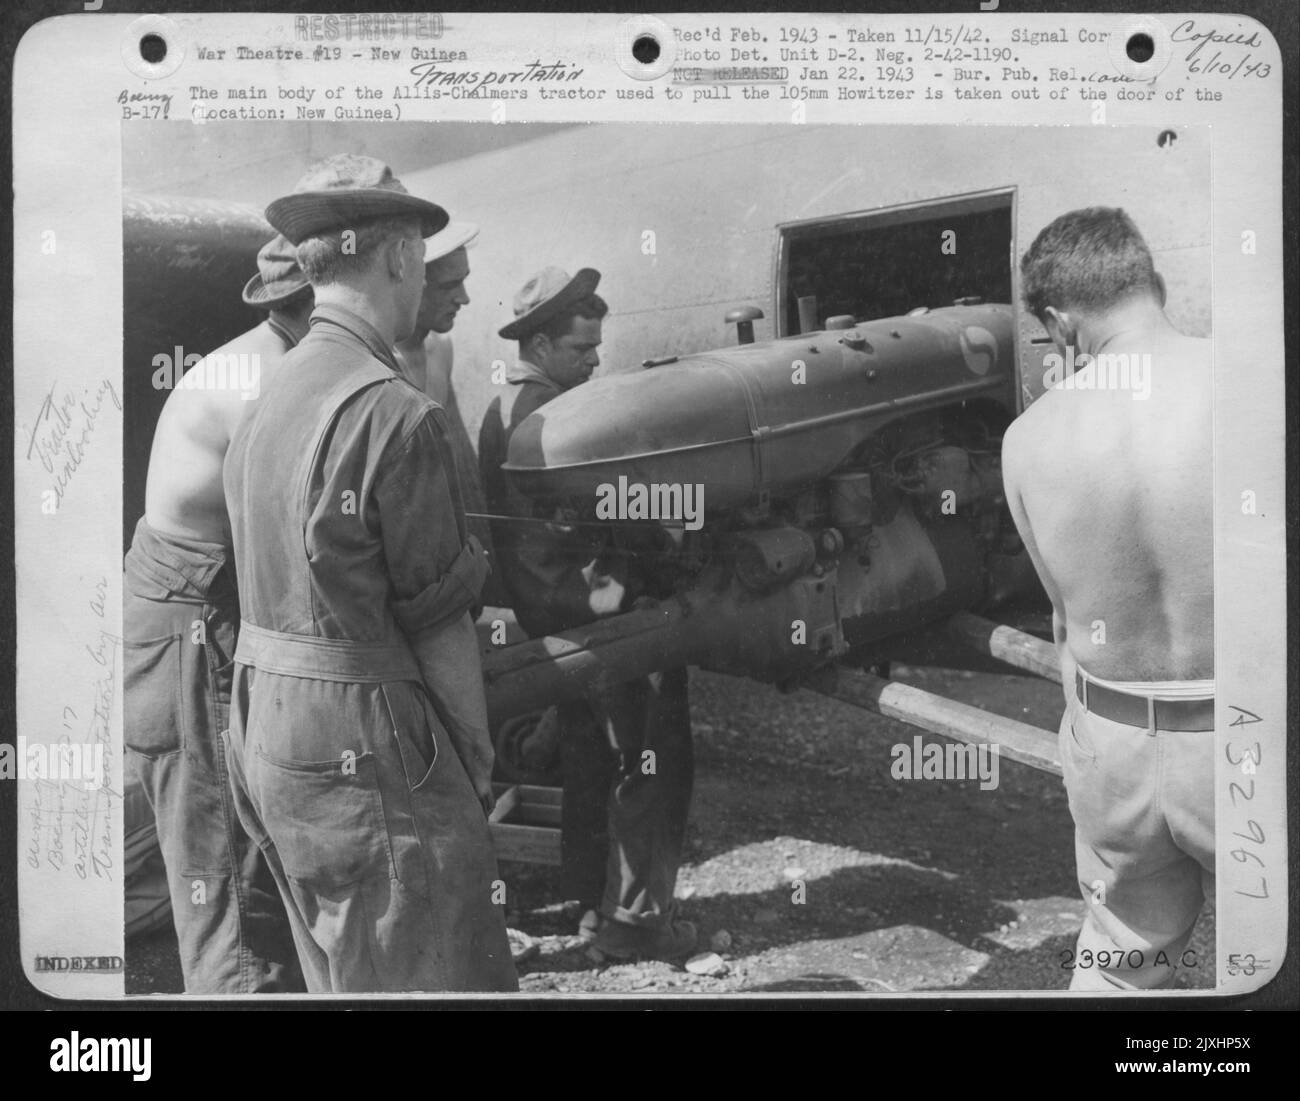 The main body of the Allis-Chalmers tractor used to pull the 105mm Howitzer is taken out of the door of the B-17. (Location: New Guinea) Stock Photo